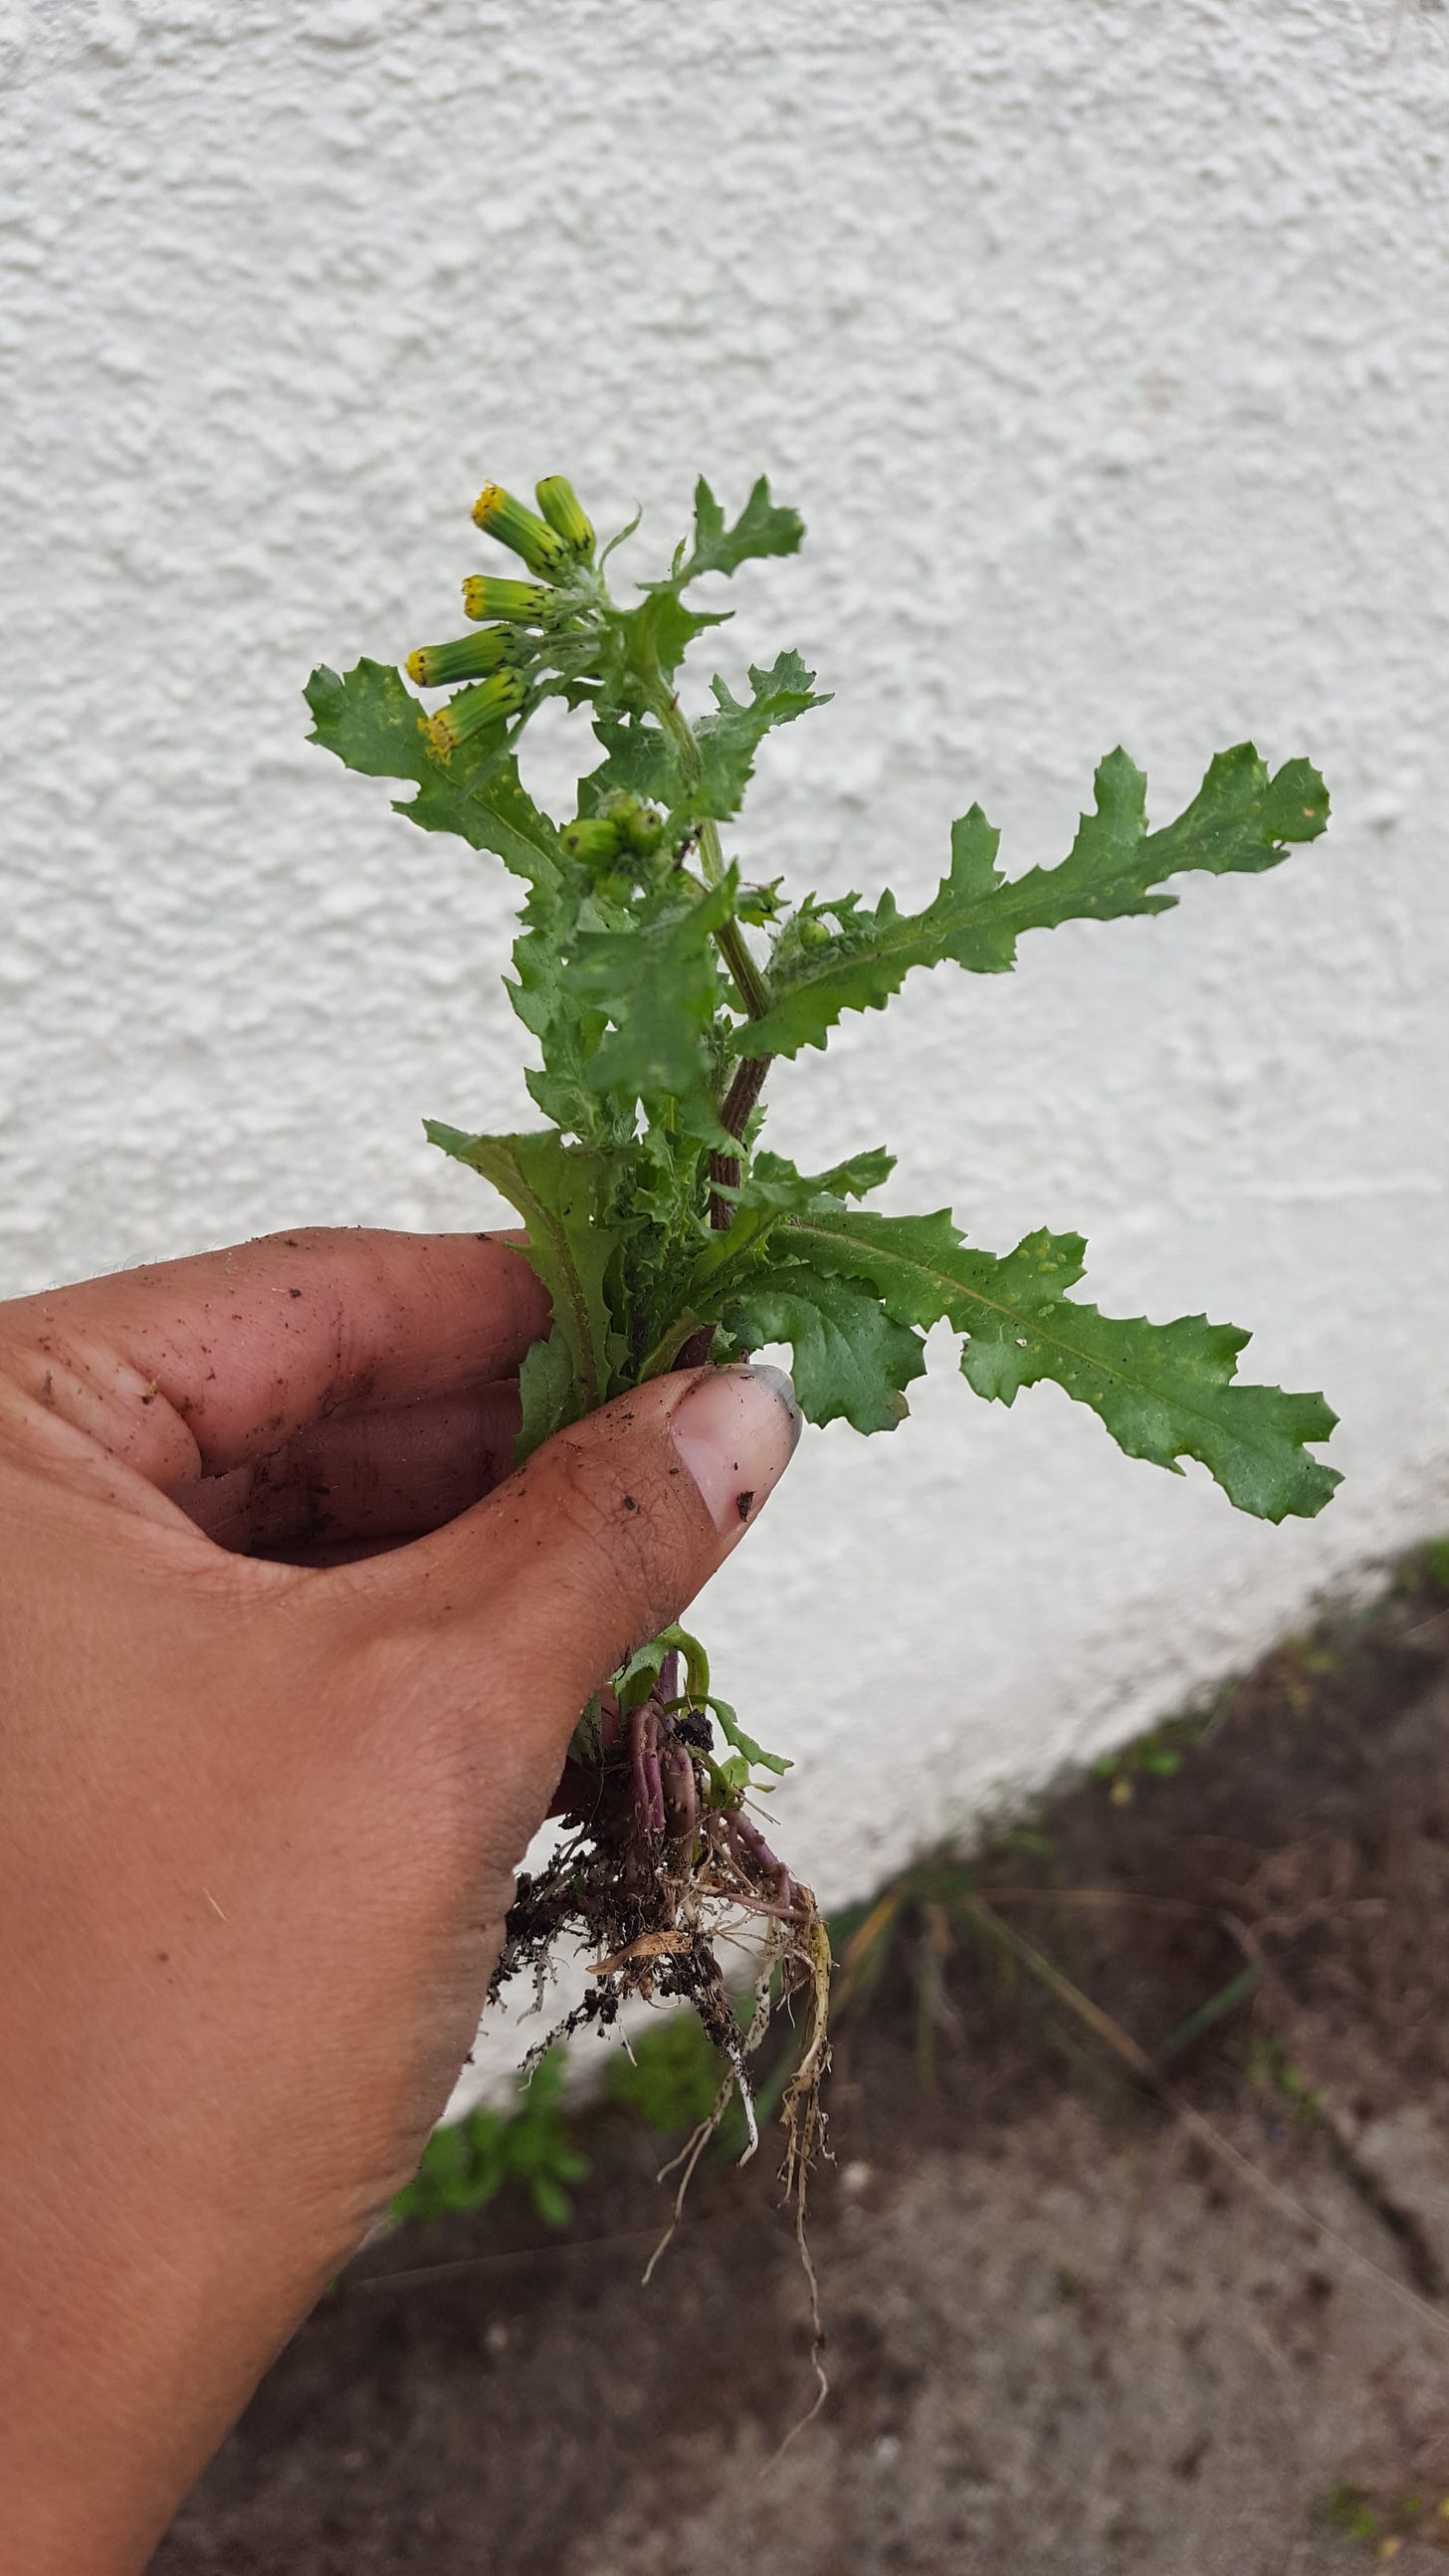 Person holding Groundsel weed (Senecio vulgaris) that has been pulled out of ground.